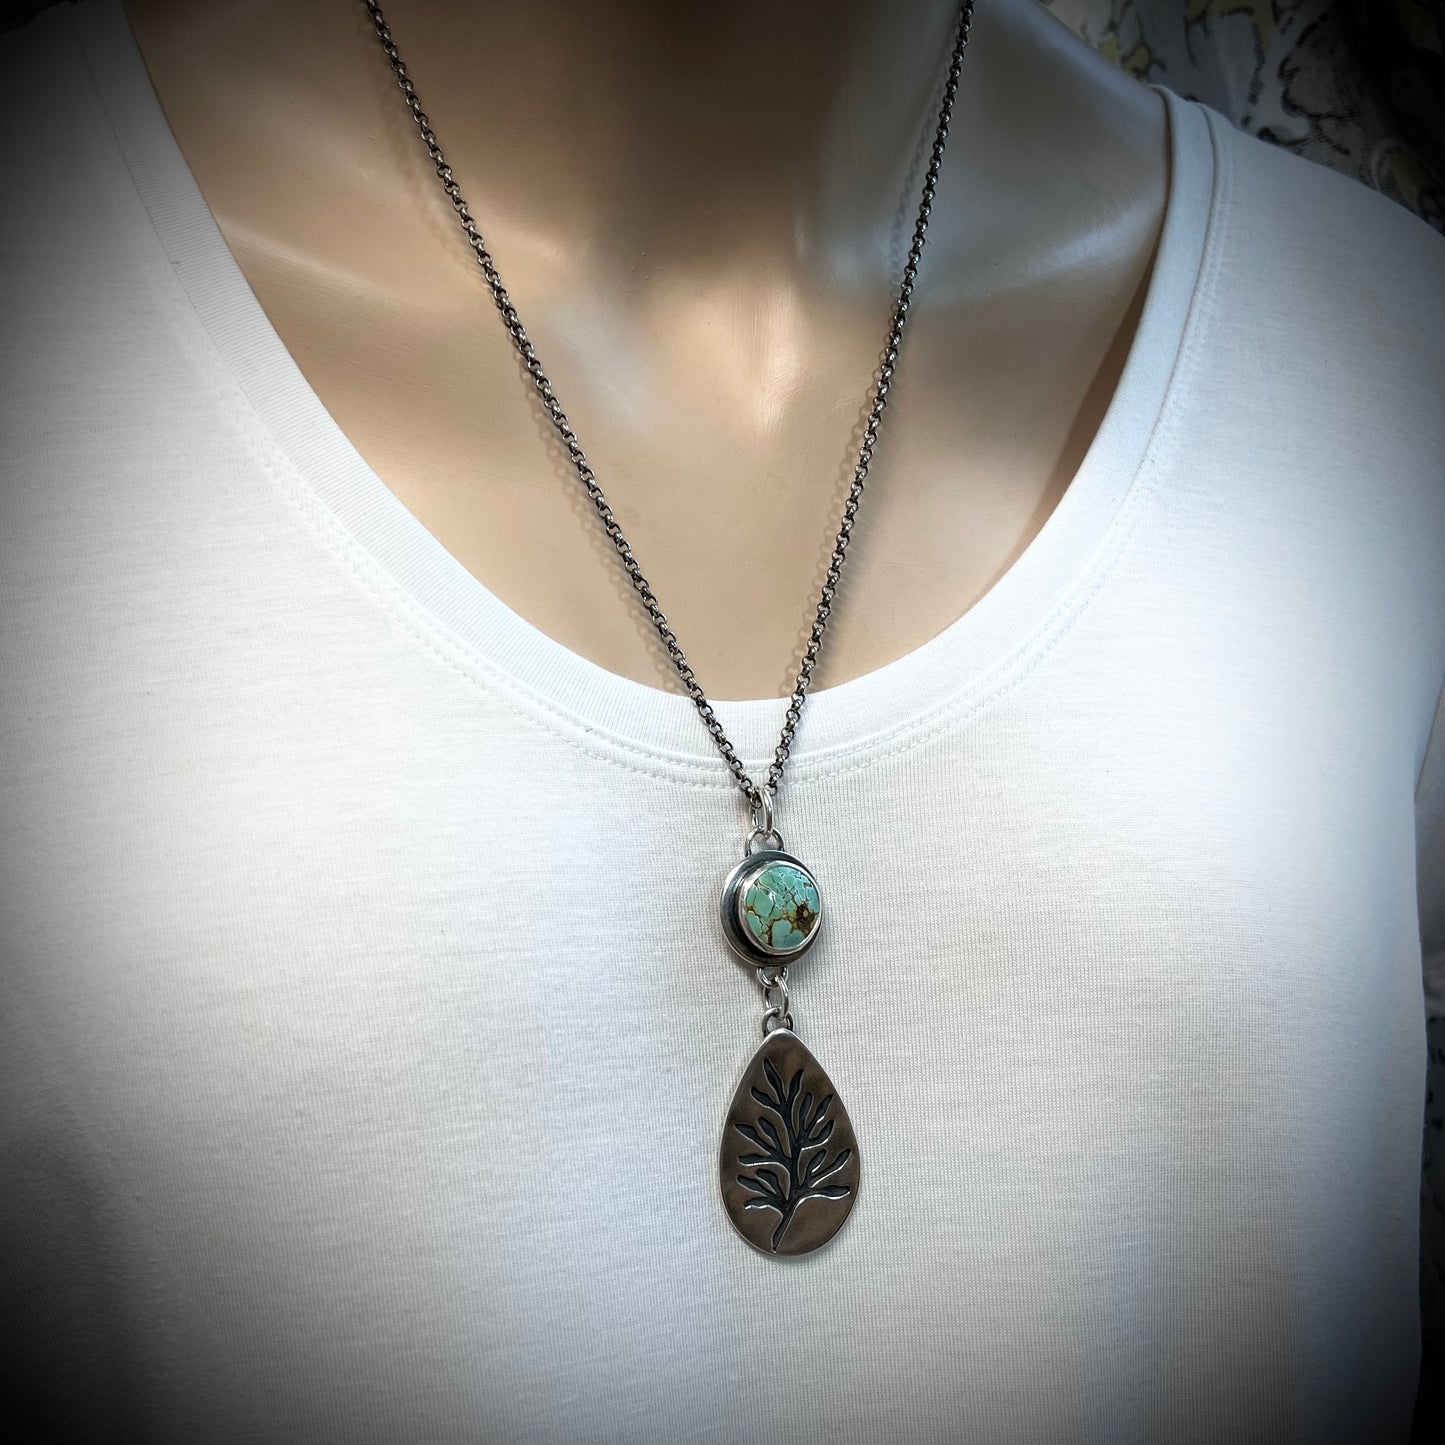 Turquoise Sterling Silver Necklace - Handmade One-of-a-kind Pendant on Sterling Silver Chain